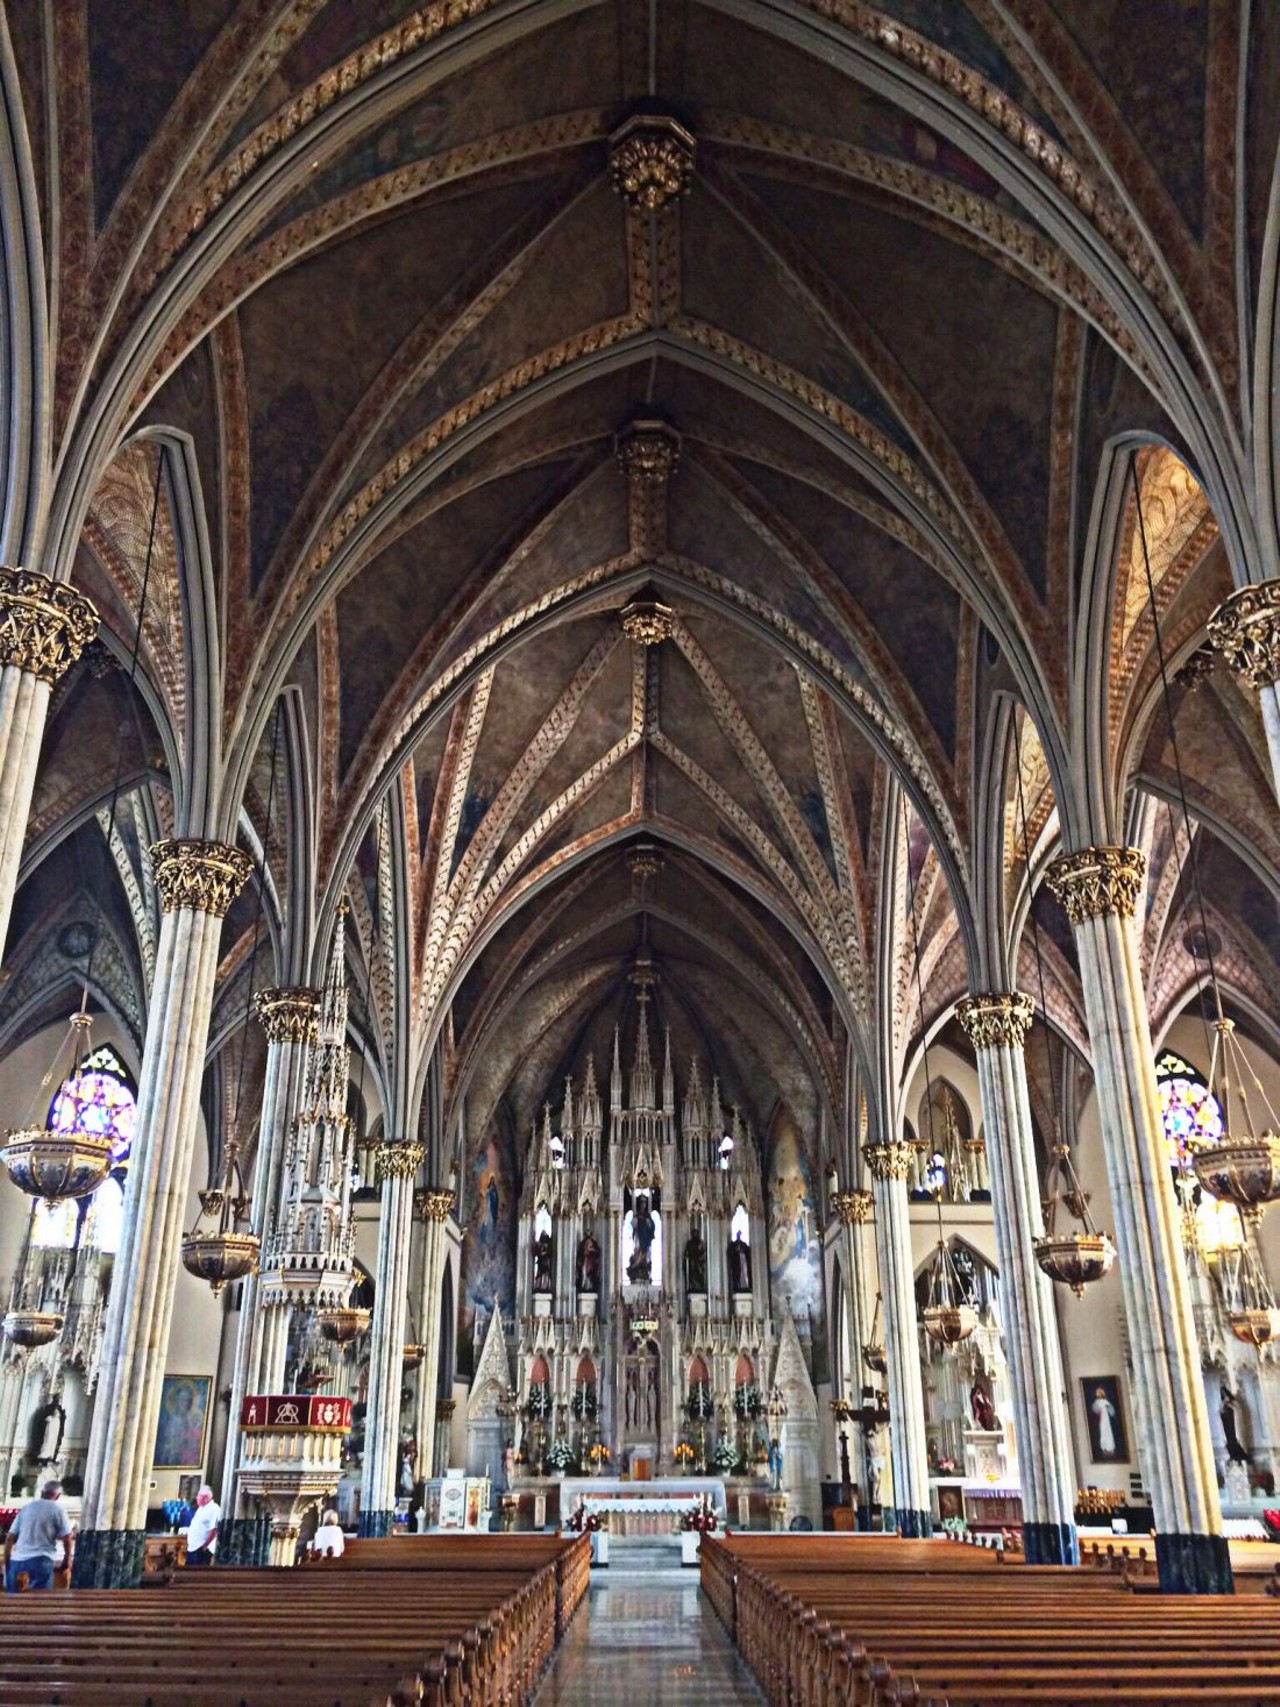 Sweetest Heart of Mary
This truly decadent Gothic Revival cathedral is the largest Catholic church in the city of Detroit. The vaulted ceilings are gorgeous, but the ornate stained glass is where its true beauty lies. 
4440 Russell St., Detroit; 313-831-6659
Photo via Flickr, Bryan DeBus